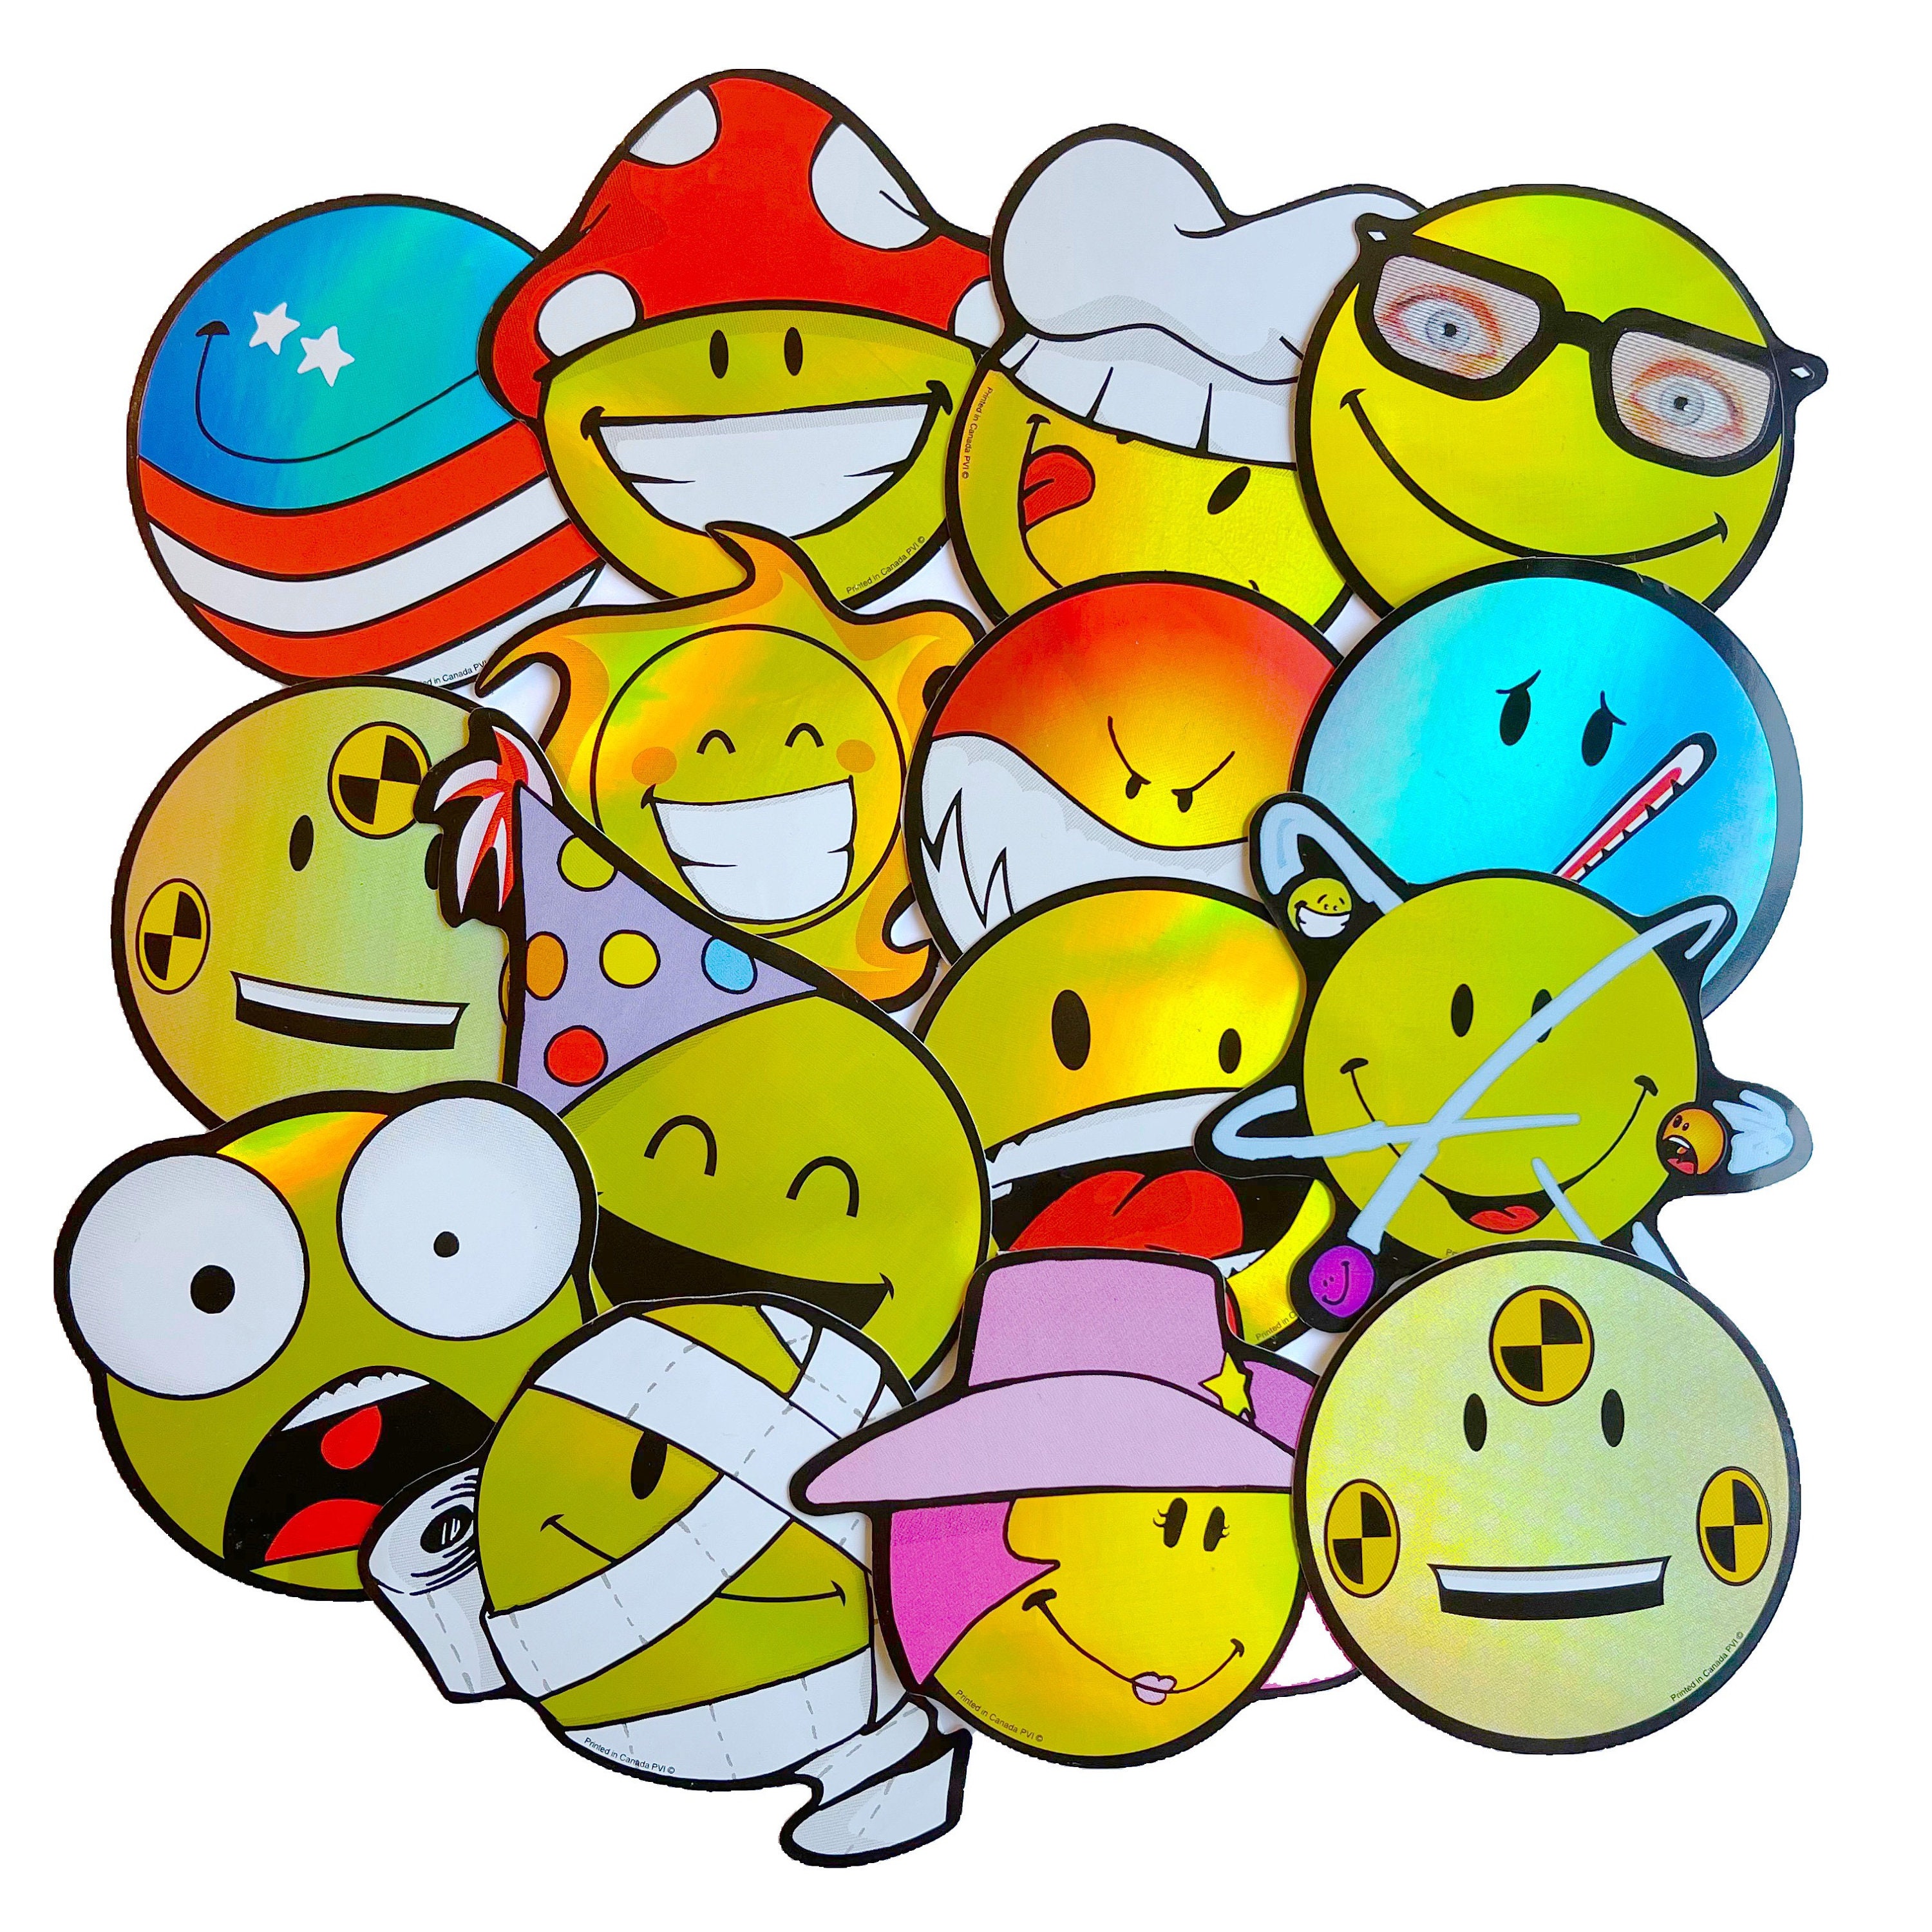 Sticker Maker - SSSFC Animated Smiley Stickers